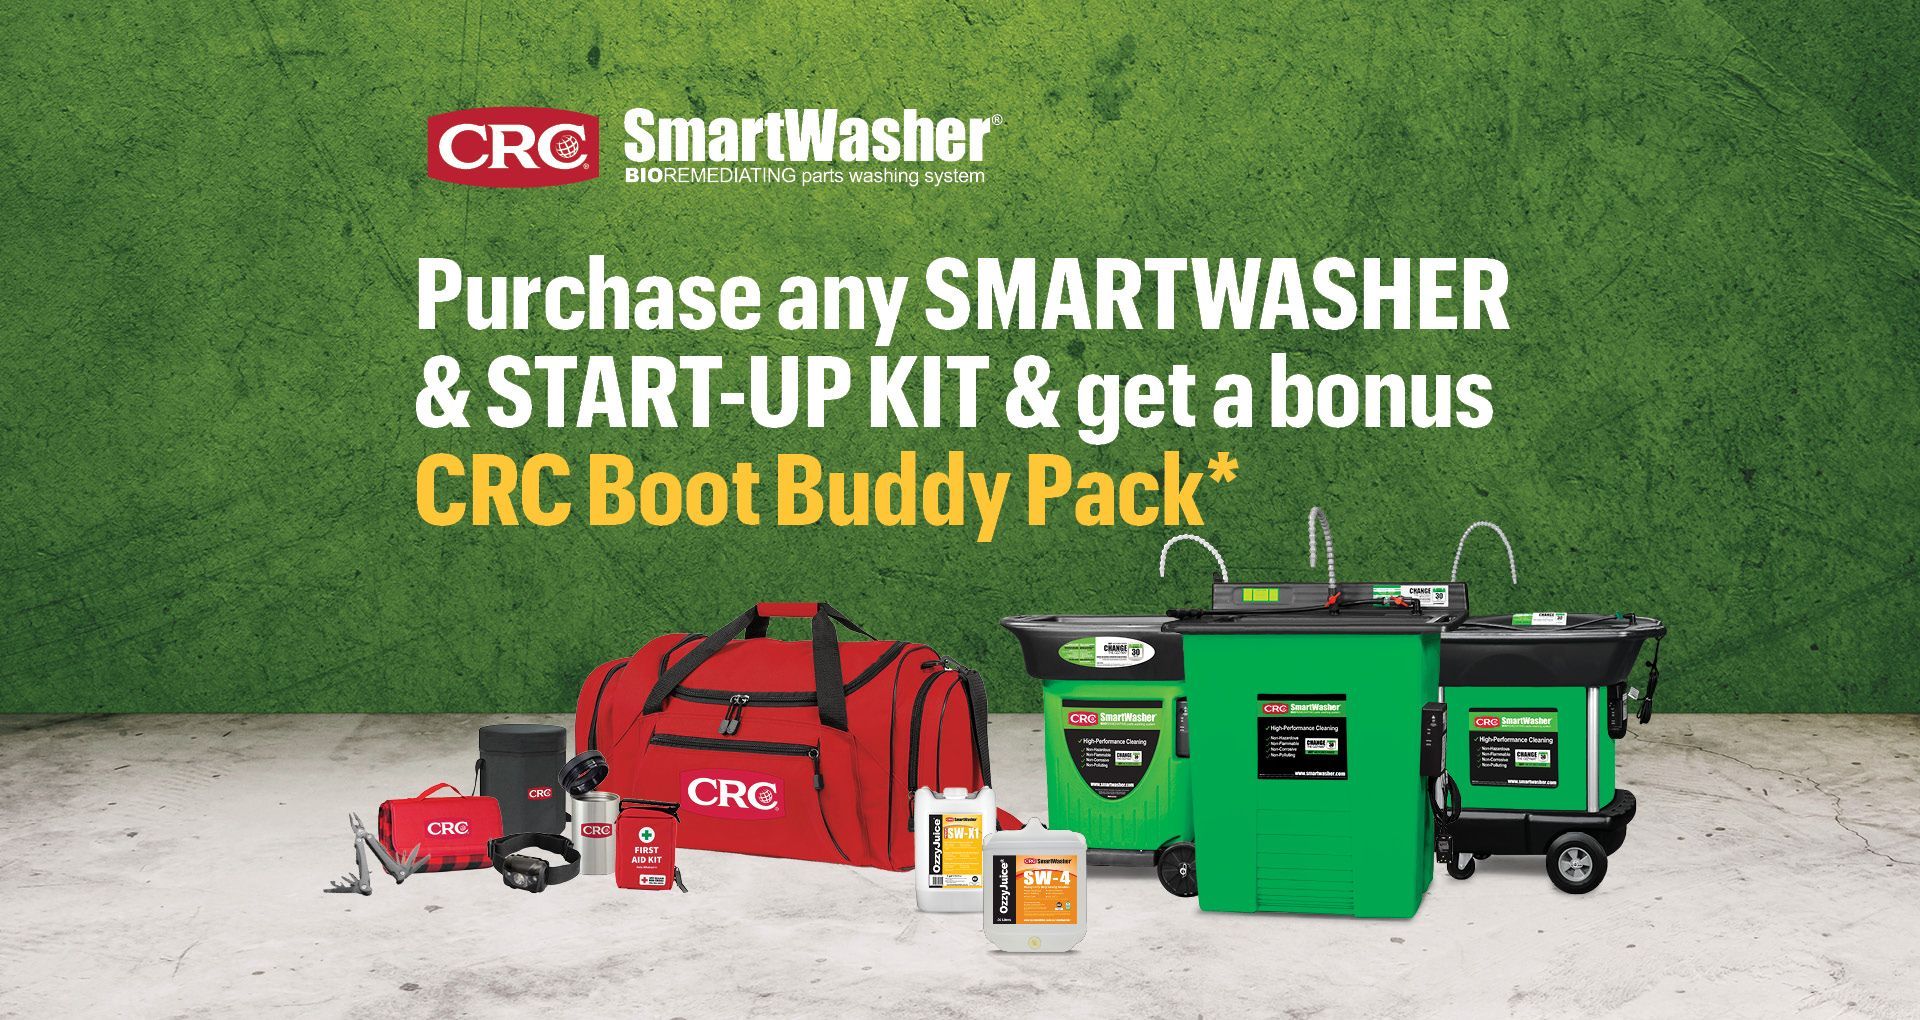 Purchase a CRC SmartWasher and receive a CRC Boot Buddy Pack!